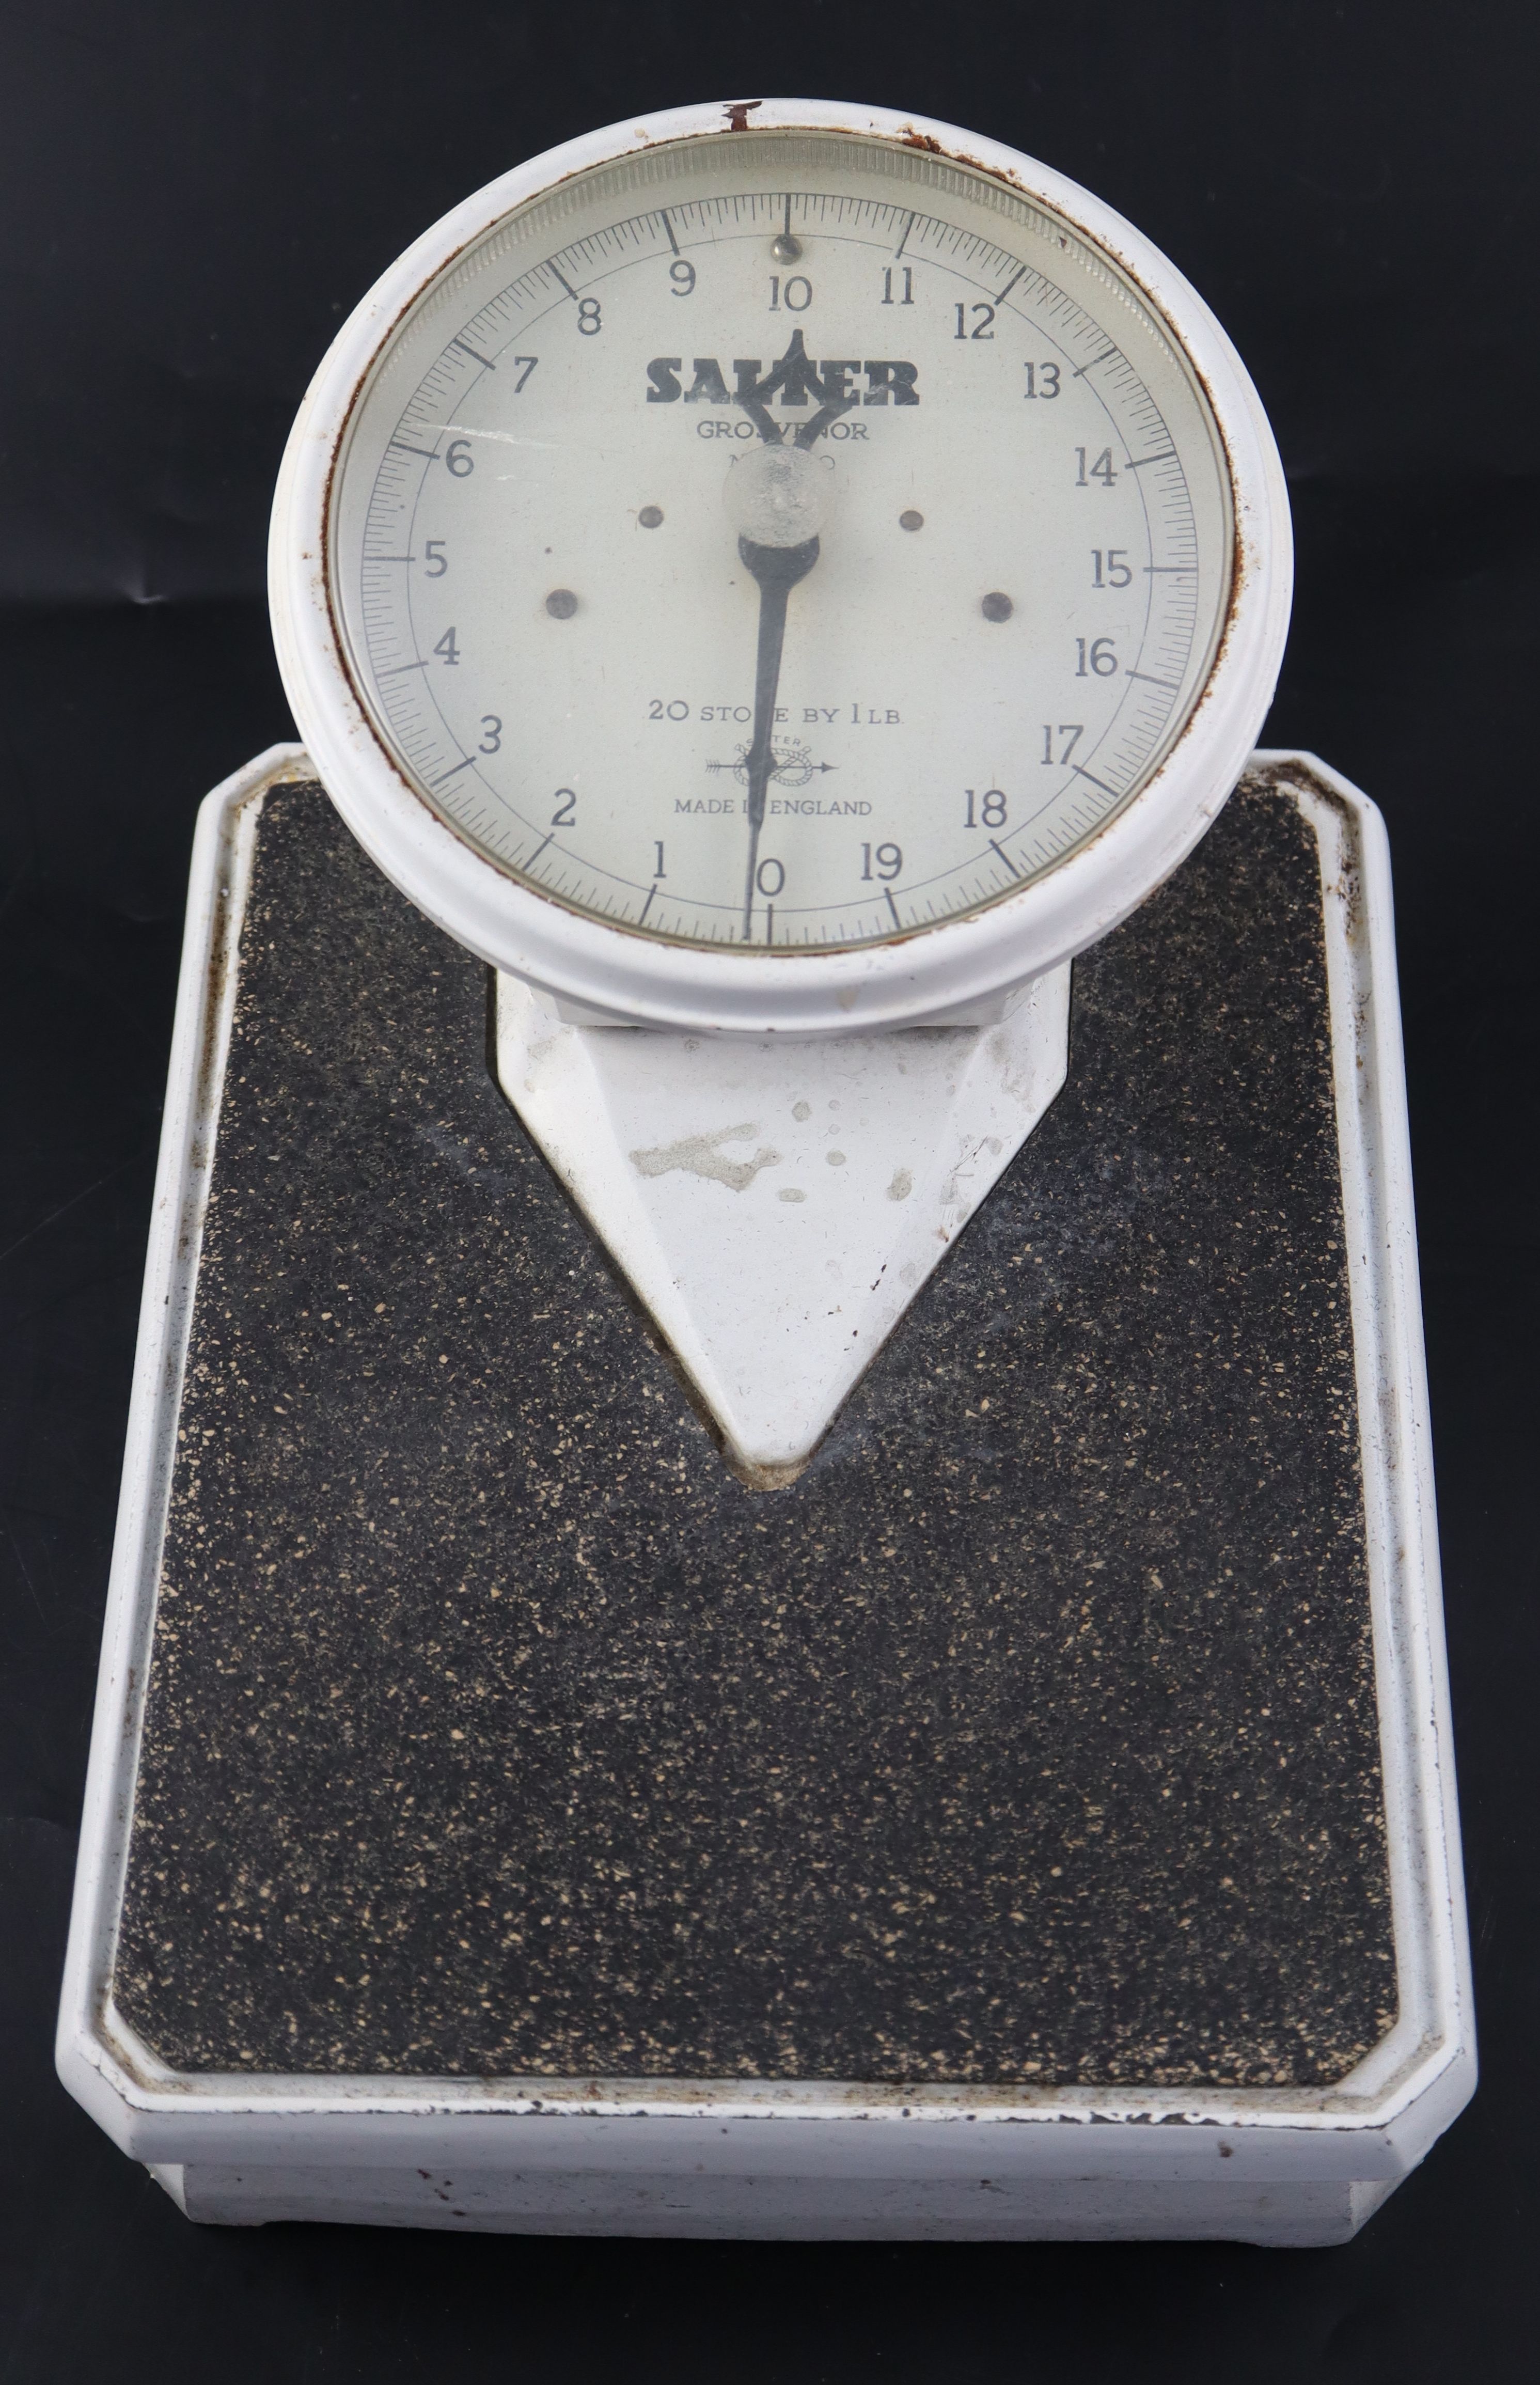 A set of Salter Grosvenor bathroom scales, number 20100 20 Stone by 1LB, 31cm height